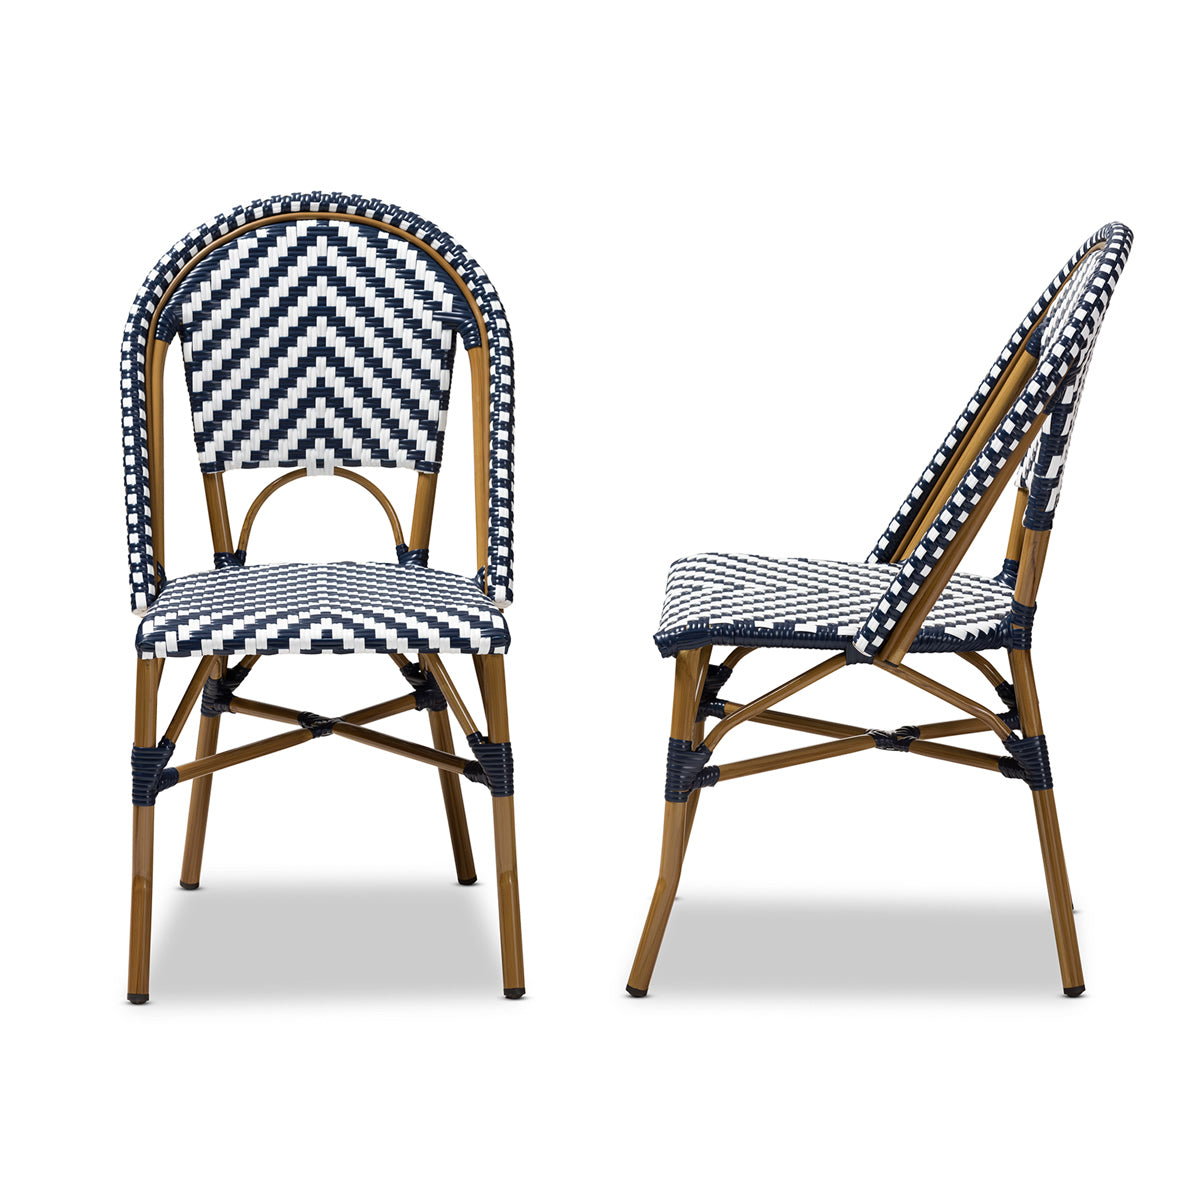 Baxton Studio Celie Classic French Indoor and Outdoor Grey and White Bamboo Style Stackable Bistro Dining Chair Set of 2 Baxton Studio-dining chair-Minimal And Modern - 3